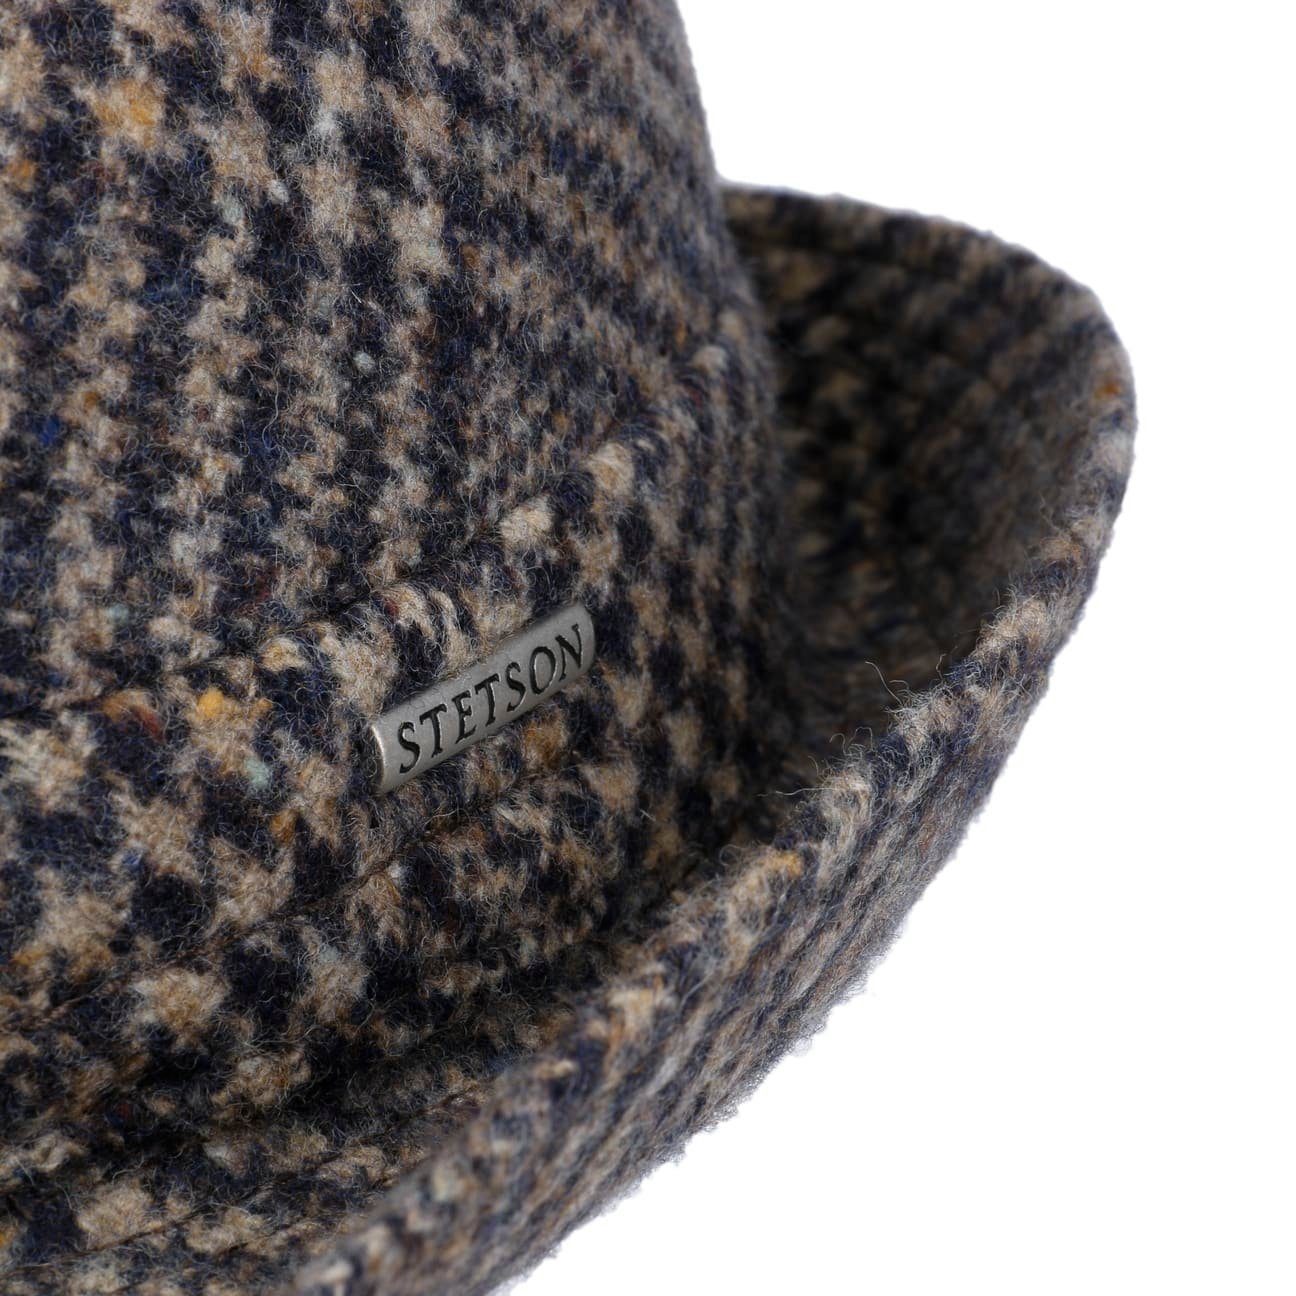 Stetson Trilby (1-St) Trilby Made in mit Futter, Italy